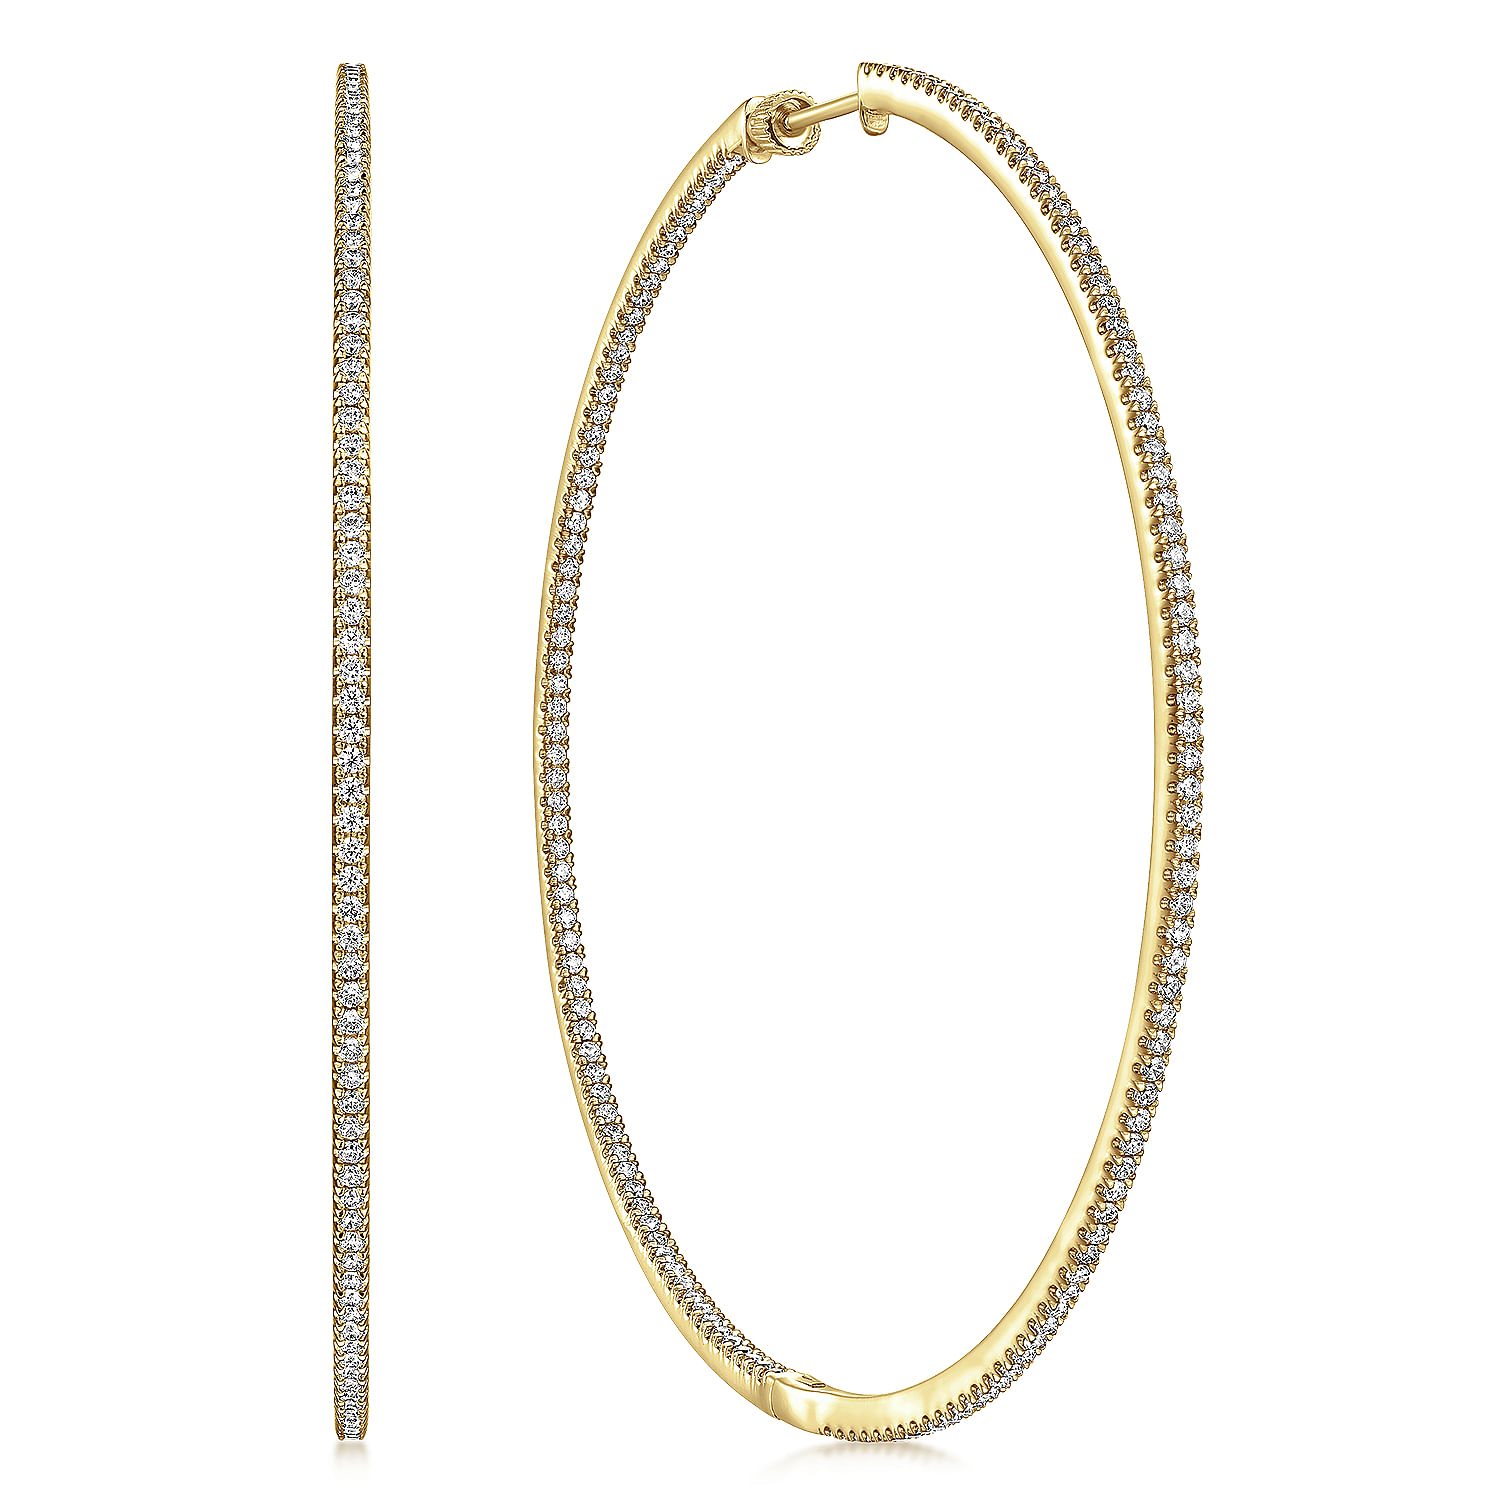 14K Yellow Gold French Pavé 80mm Round Inside Out Diamond Hoop Earrings